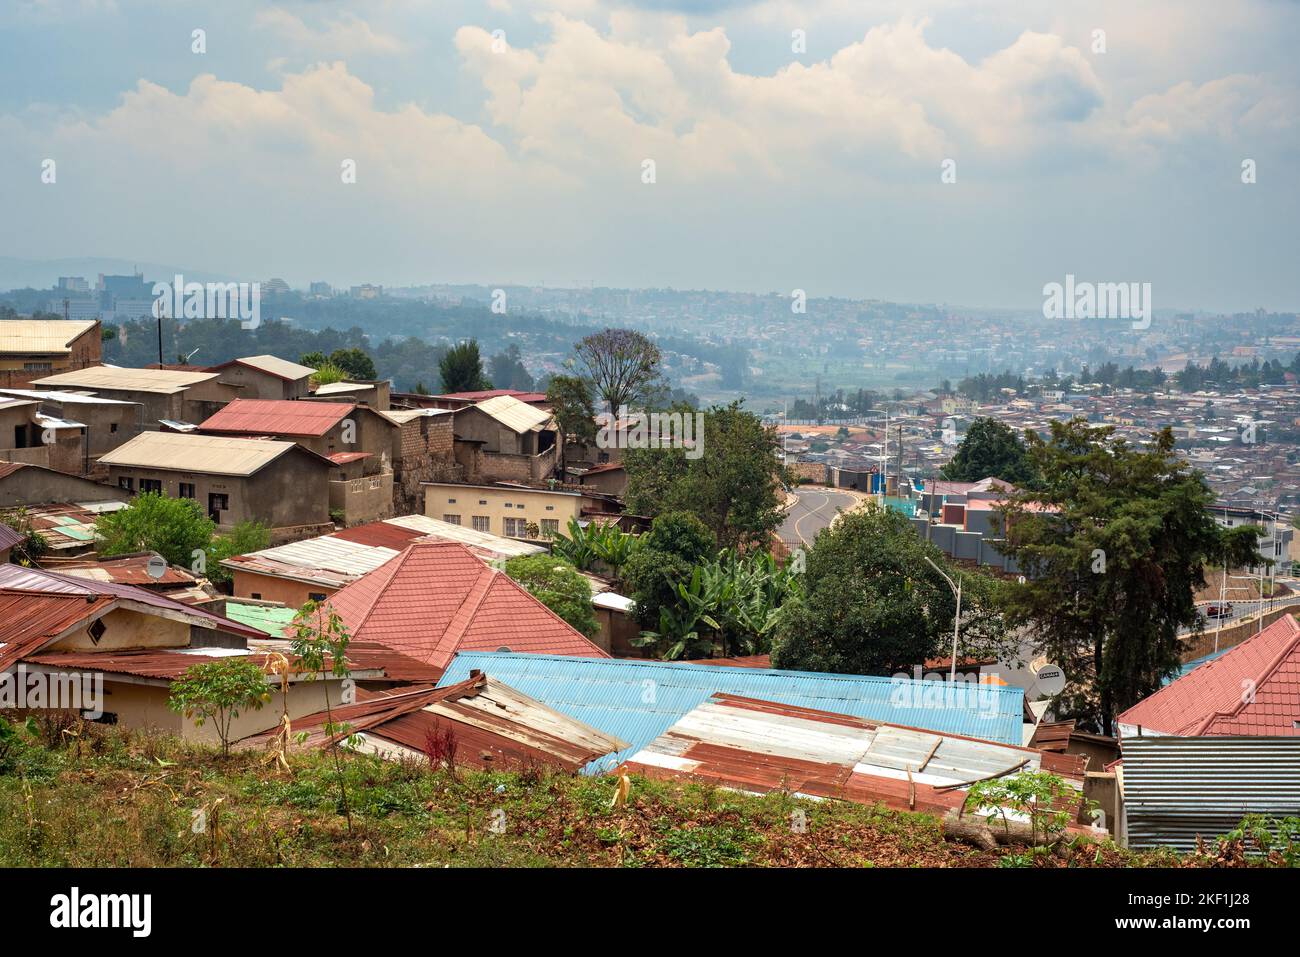 Kigali, Rwanda - August 17 2022: A view looking out over the tightly packed houses in the Nyamirambo suburb of Kigali. Stock Photo